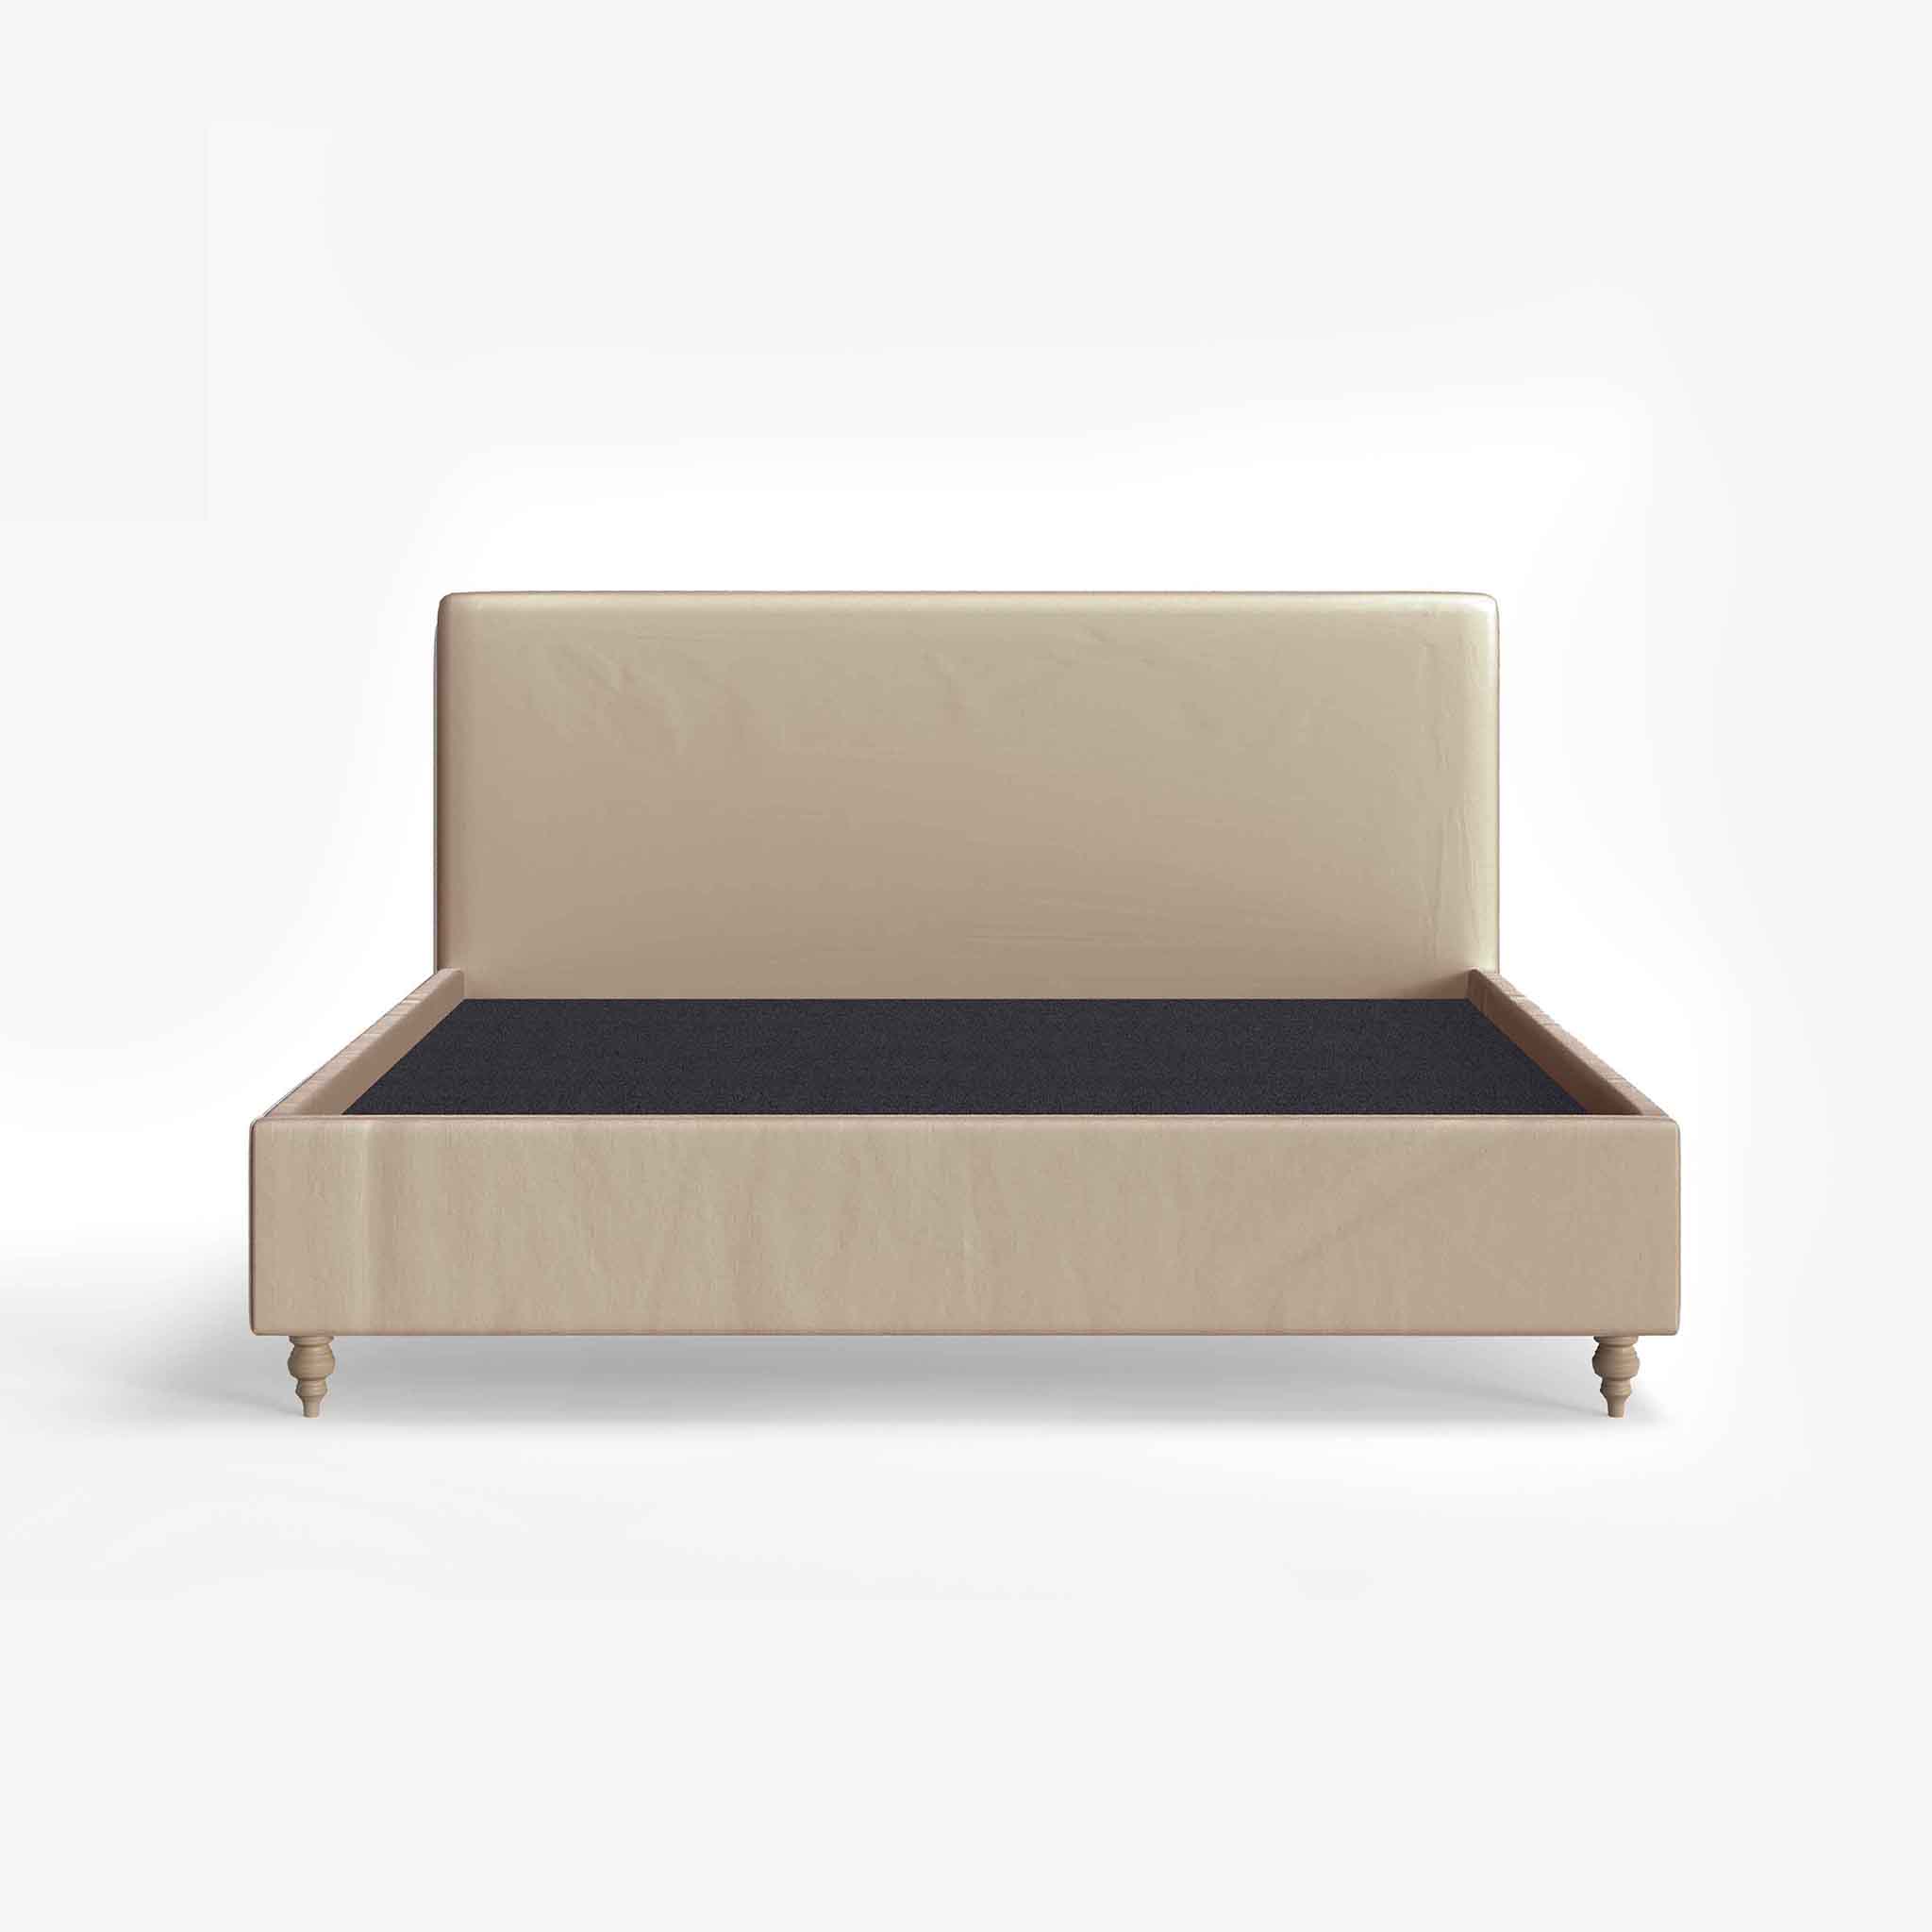 O'Halloran Velvet Upholstered Bed with end-lift Ottoman Storage, Contemporary Interiors, Online Shopping, Craftsmanship, Wooden feet, Bazaar